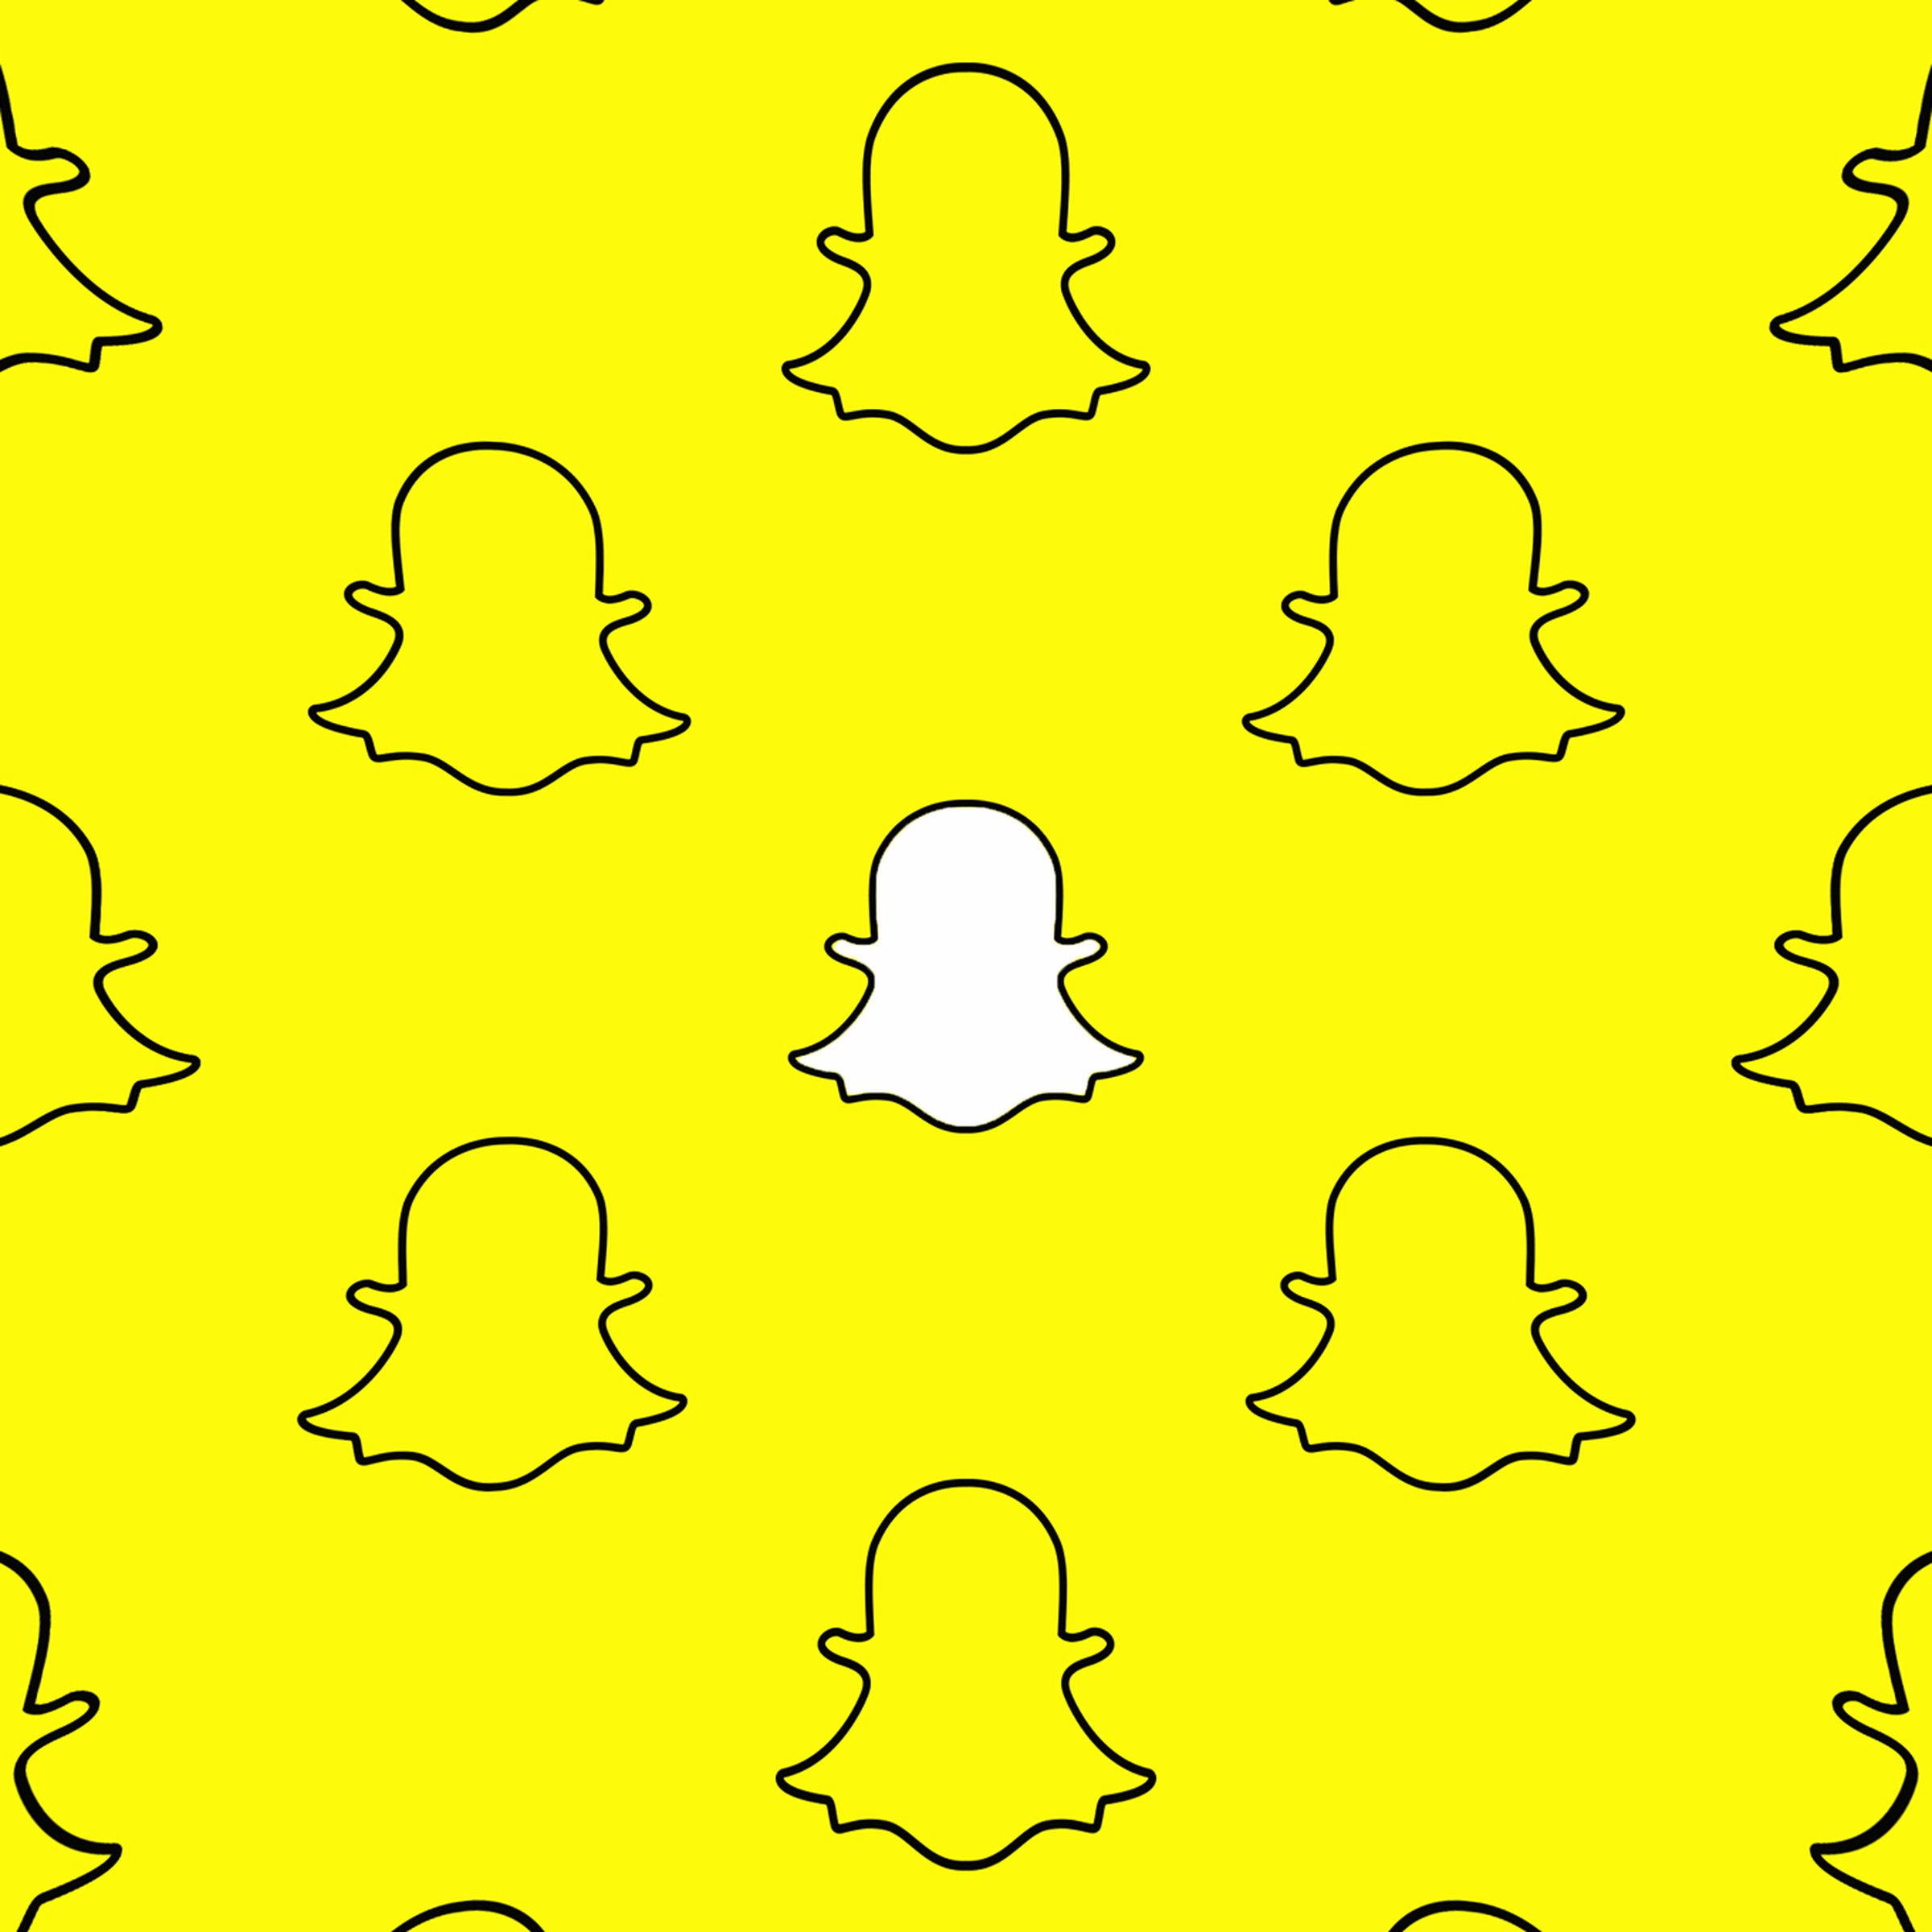 The Snapchat white ghost logo on a bright yellow background.